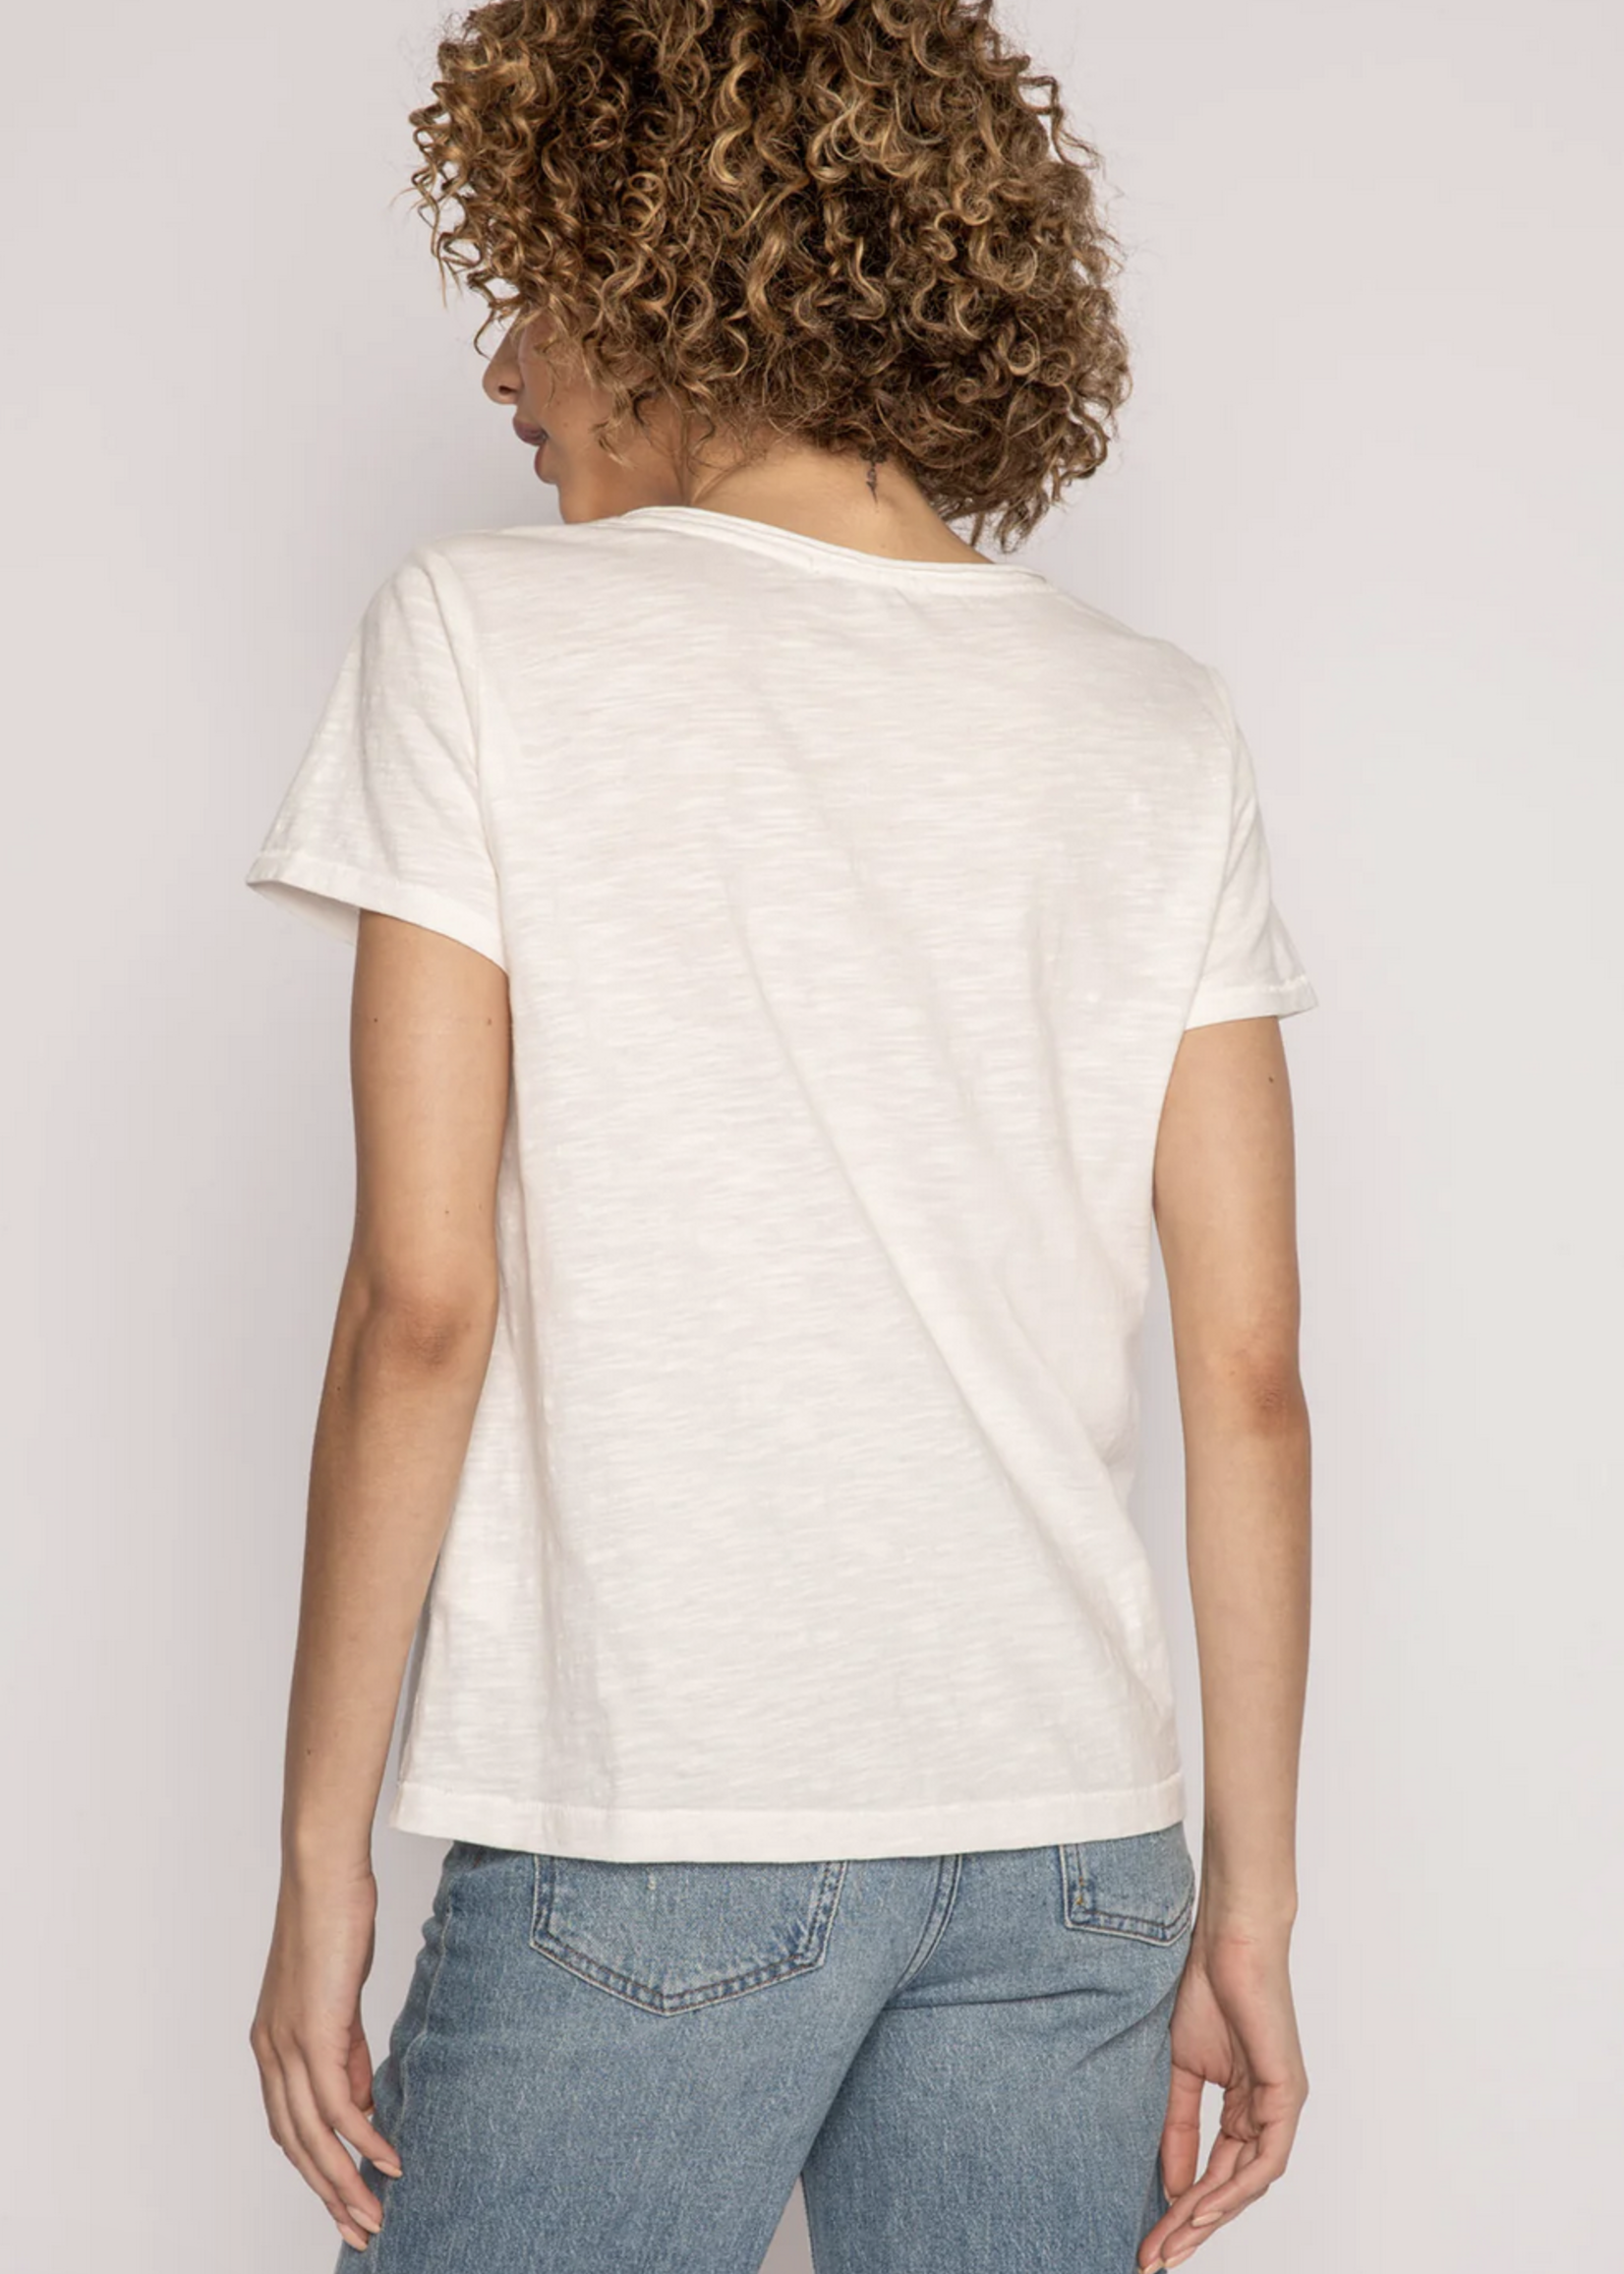 P.J. SALVAGE BACK TO BASICS S/S TOP